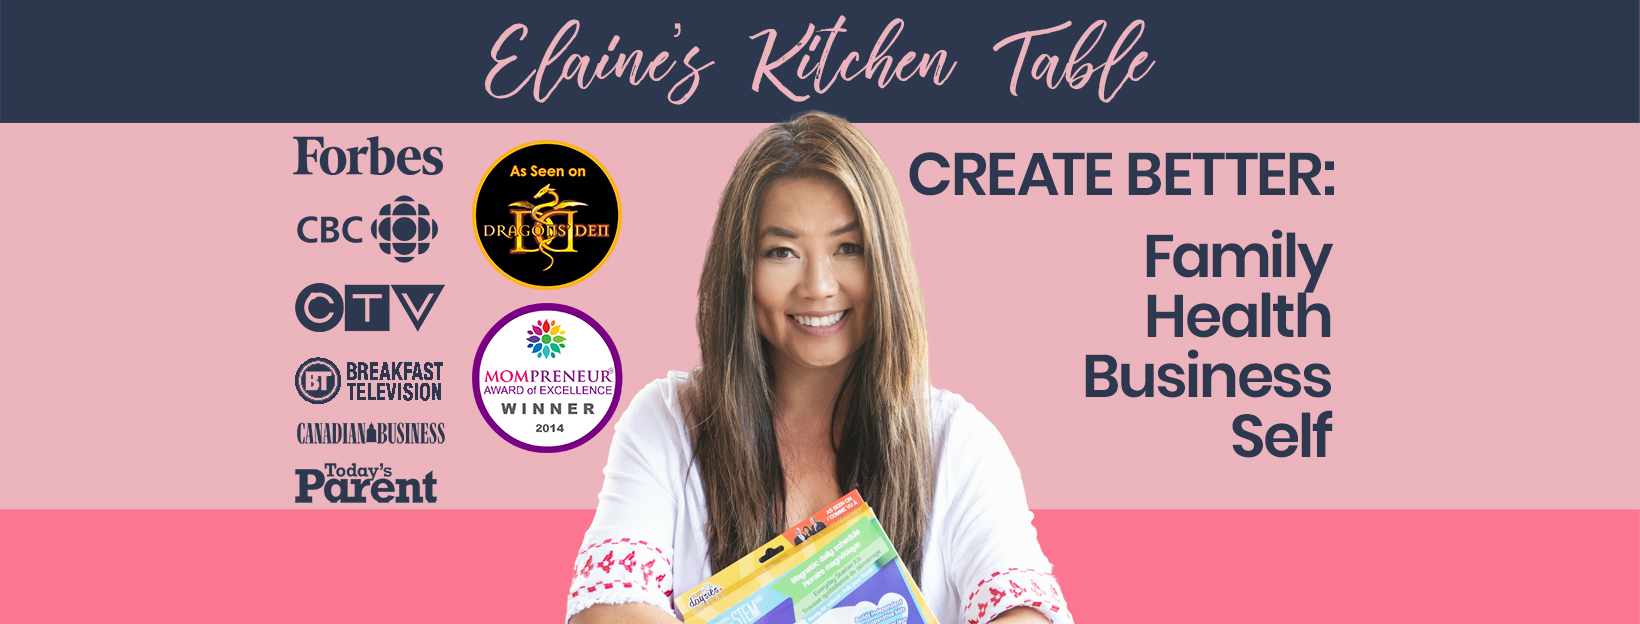 Elaine’s Kitchen Table | Create Better Family, Health, Business, Self